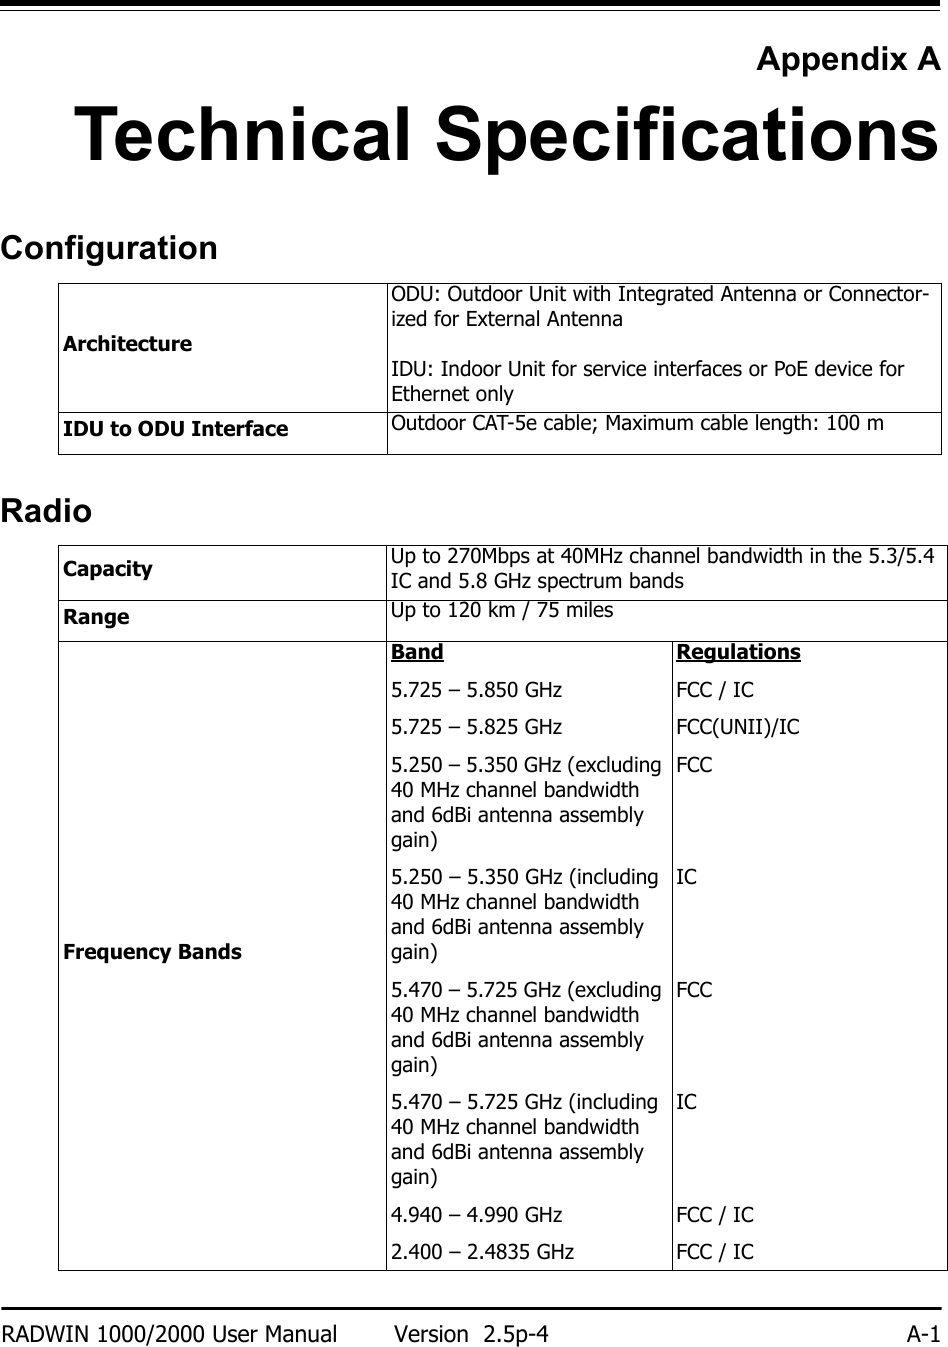 RADWIN 1000/2000 User Manual Version  2.5p-4 A-1Appendix ATechnical SpecificationsConfigurationRadioArchitectureODU: Outdoor Unit with Integrated Antenna or Connector-ized for External AntennaIDU: Indoor Unit for service interfaces or PoE device for Ethernet onlyIDU to ODU Interface Outdoor CAT-5e cable; Maximum cable length: 100 mCapacity Up to 270Mbps at 40MHz channel bandwidth in the 5.3/5.4 IC and 5.8 GHz spectrum bandsRange Up to 120 km / 75 milesFrequency BandsBand5.725 – 5.850 GHz5.725 – 5.825 GHz 5.250 – 5.350 GHz (excluding 40 MHz channel bandwidth and 6dBi antenna assembly gain)5.250 – 5.350 GHz (including 40 MHz channel bandwidth and 6dBi antenna assembly gain)5.470 – 5.725 GHz (excluding 40 MHz channel bandwidth and 6dBi antenna assembly gain)5.470 – 5.725 GHz (including 40 MHz channel bandwidth and 6dBi antenna assembly gain)4.940 – 4.990 GHz 2.400 – 2.4835 GHzRegulationsFCC / ICFCC(UNII)/ICFCCICFCCICFCC / ICFCC / IC